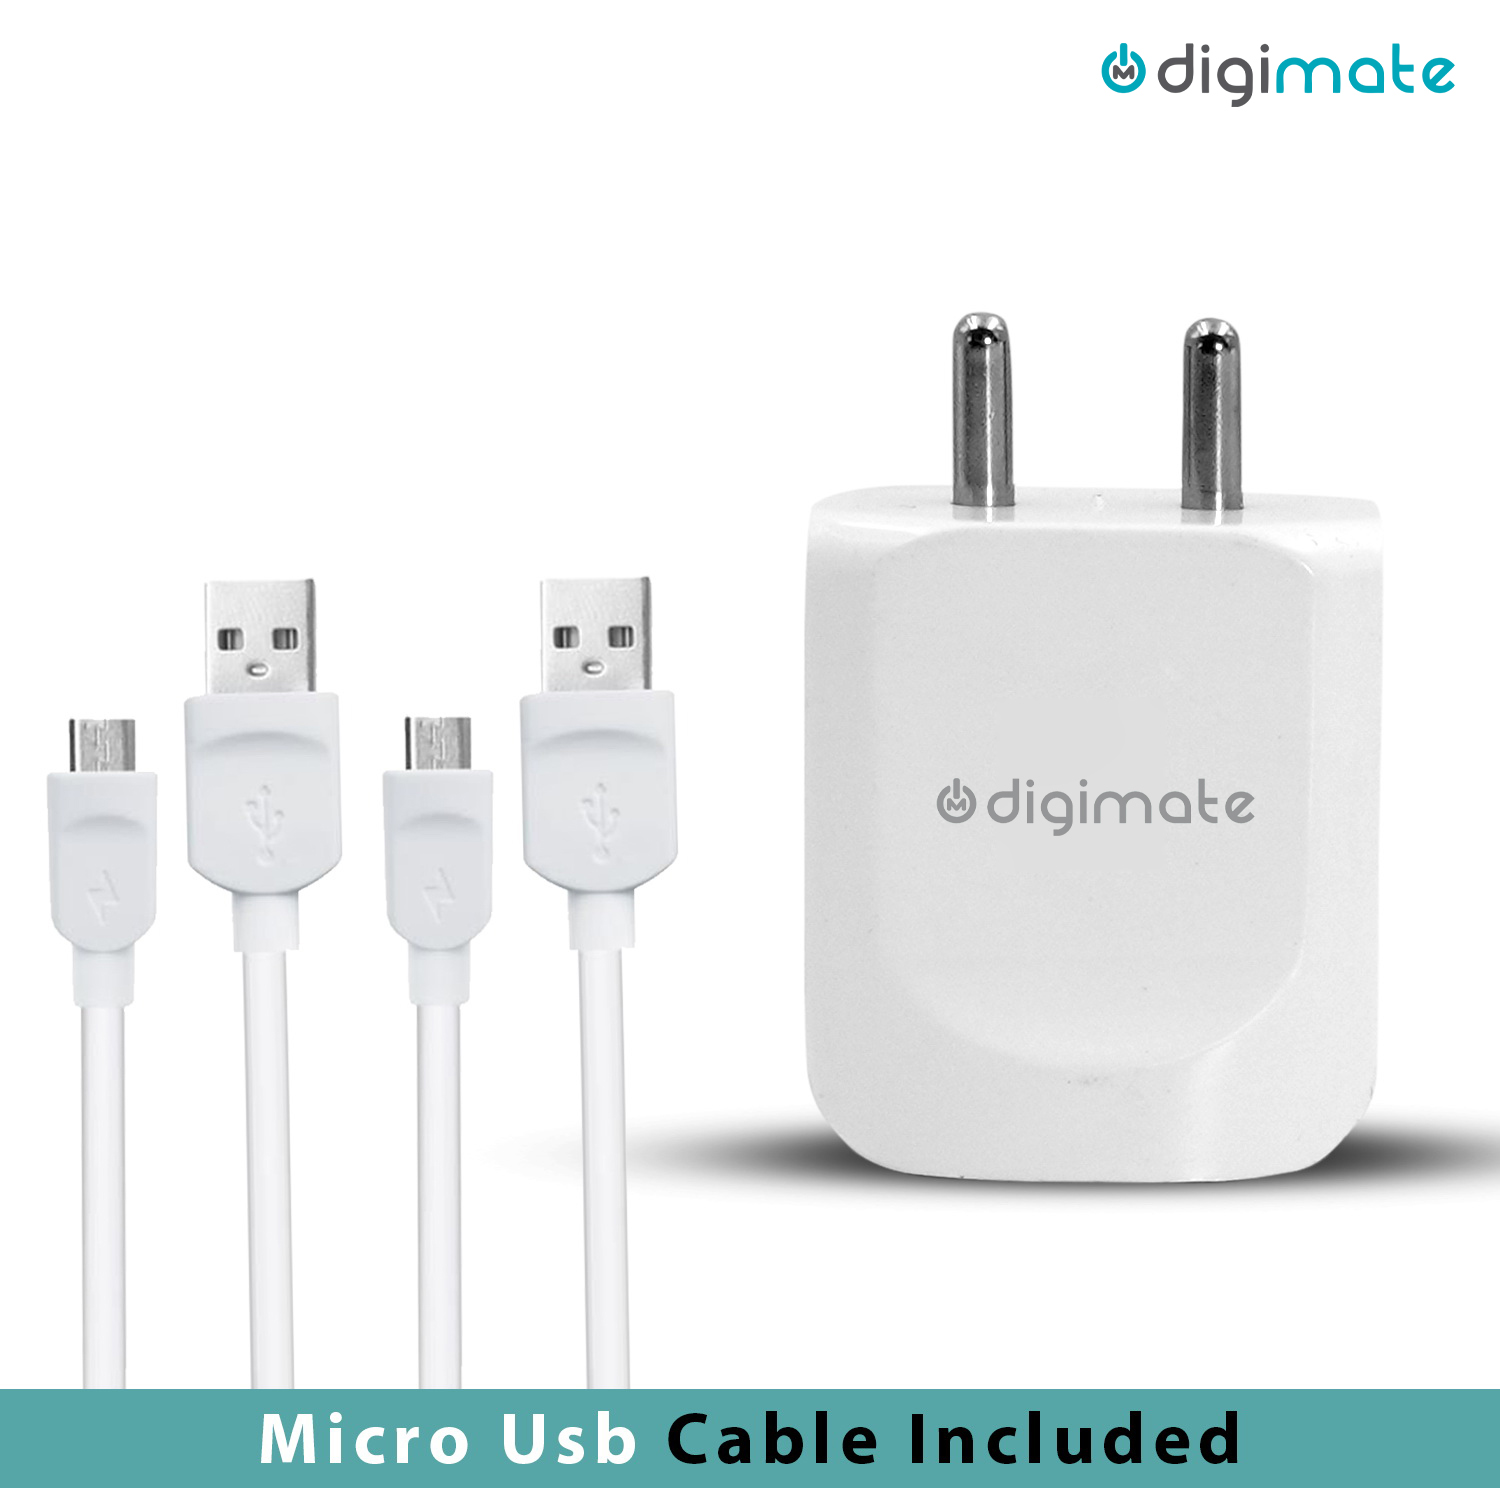 Digimate Mobile Charger Dual Port Adapter 2.4 Amp Fast Charger For Android Devices Free 2 Micro USB Cable  White 